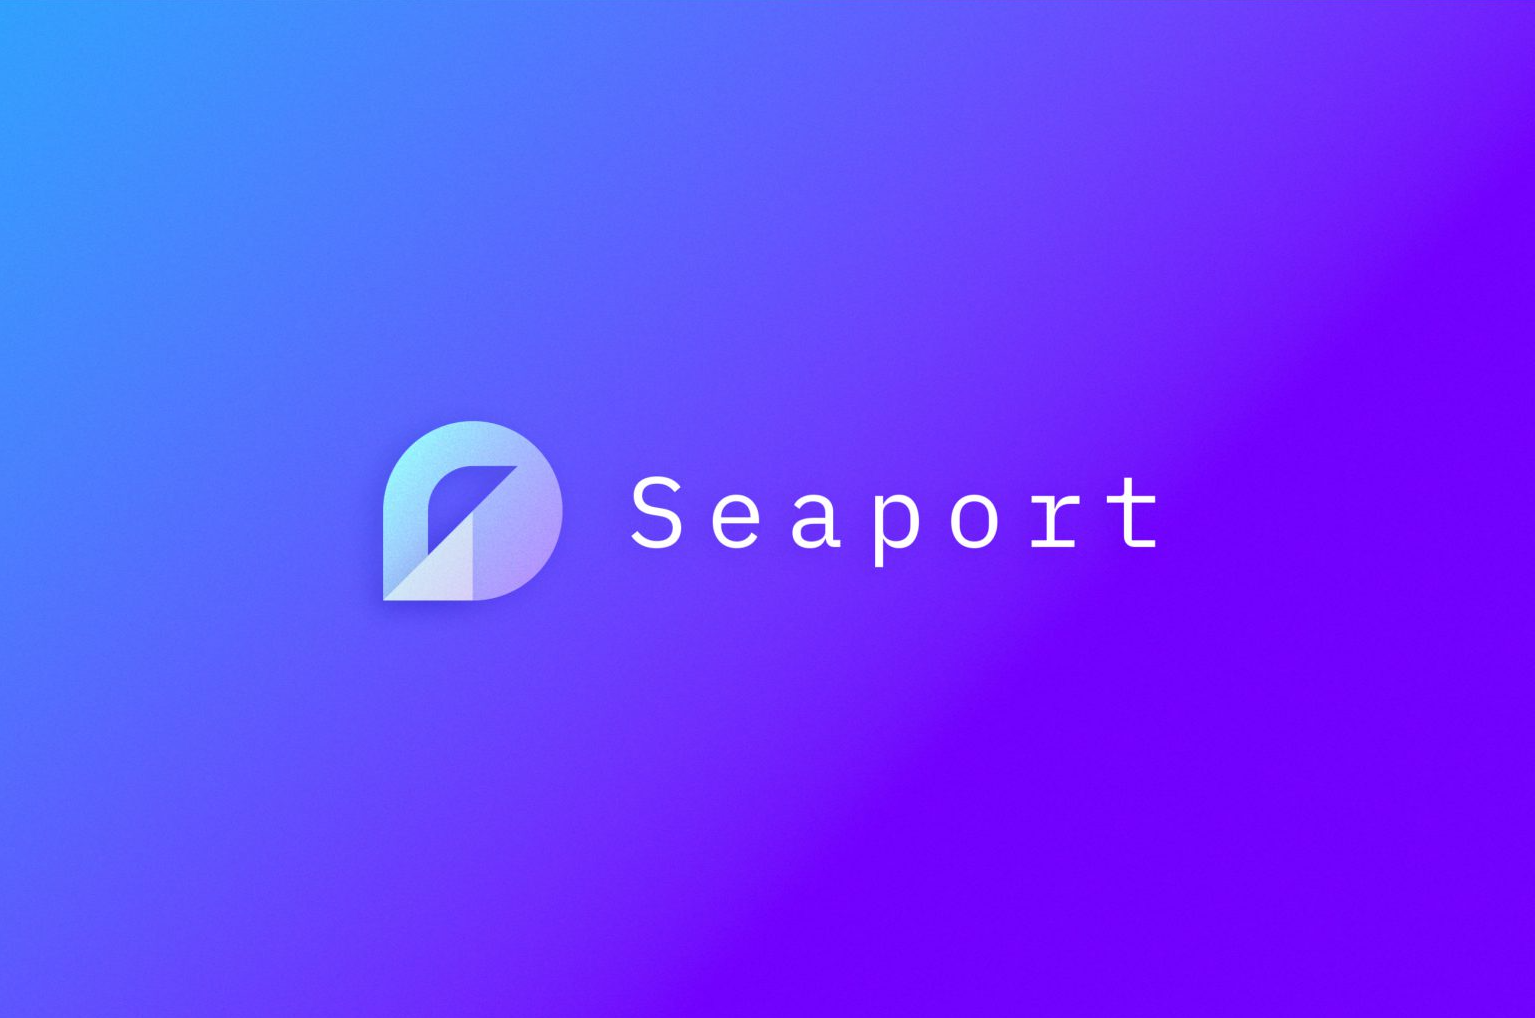 OpenSea launches a new web3 marketplace protocol called 'Seaport' with many significant improvements